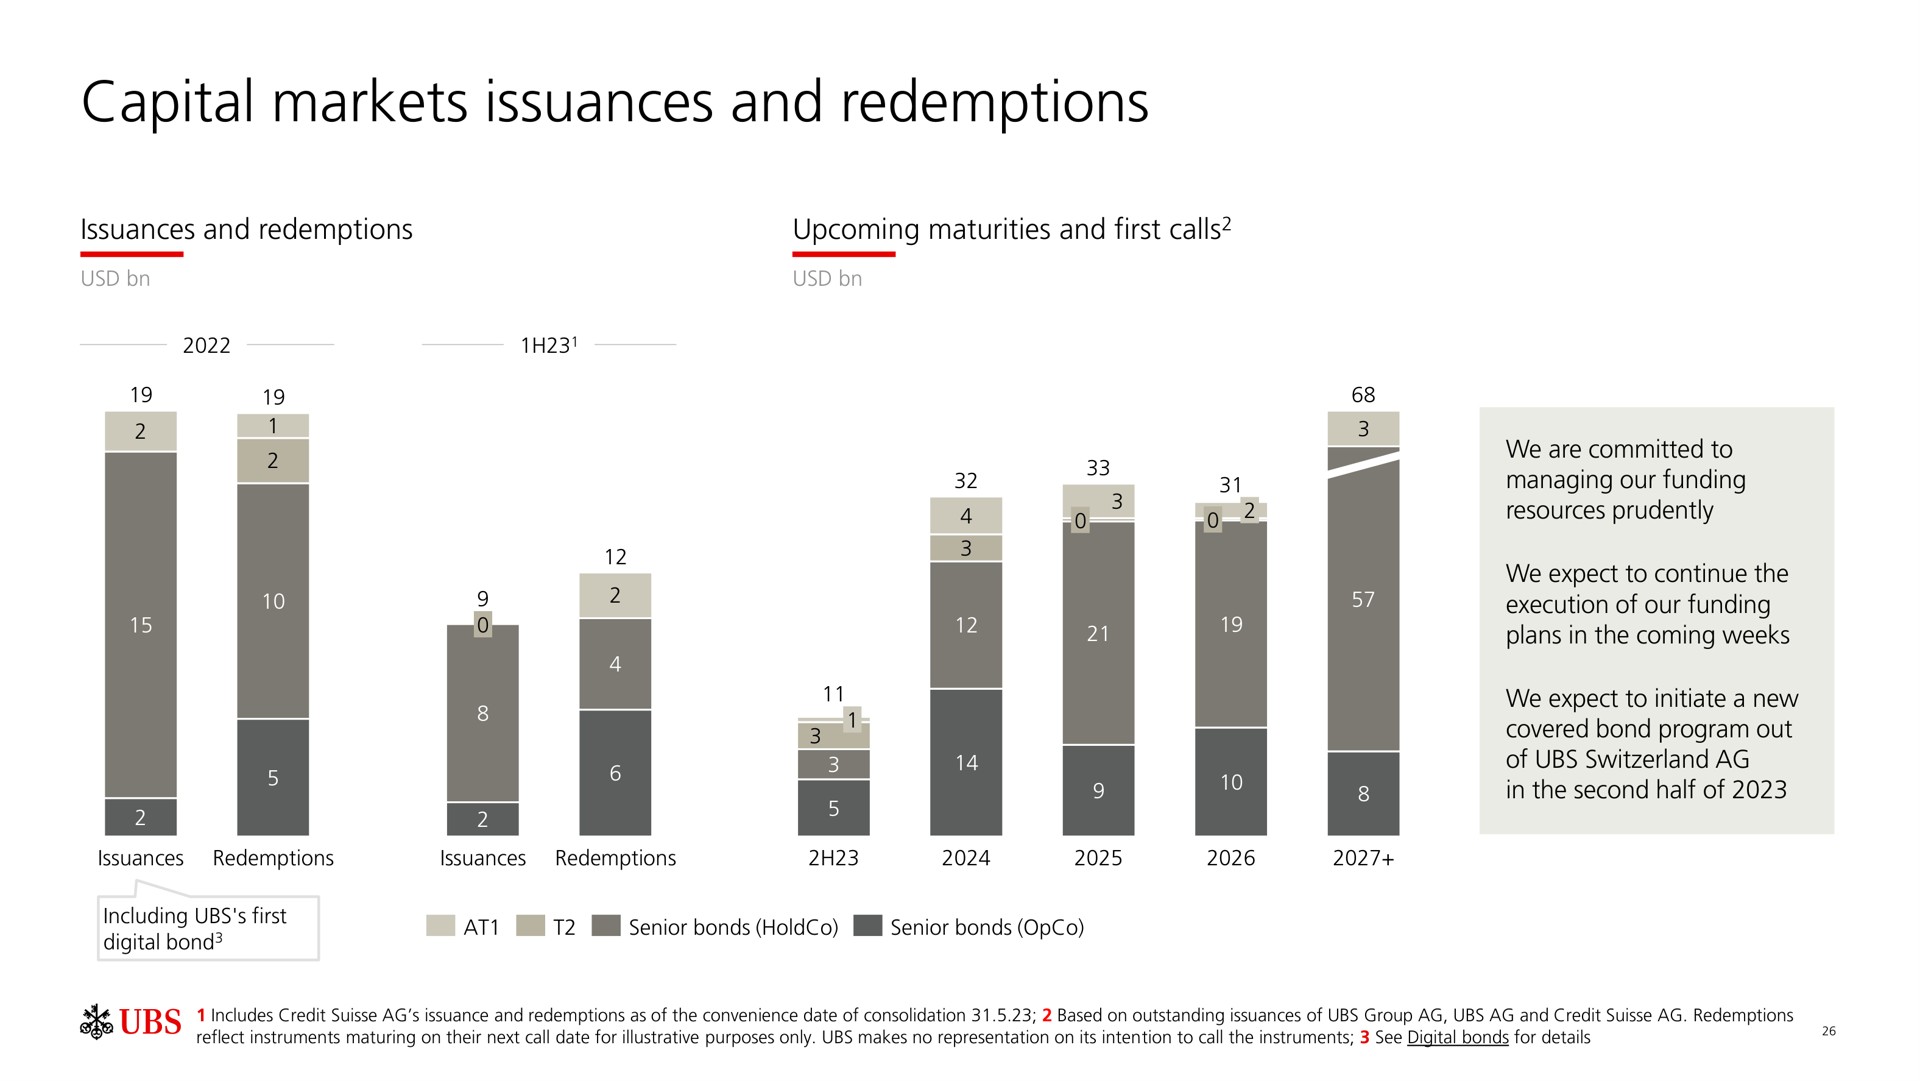 capital markets issuances and redemptions | UBS